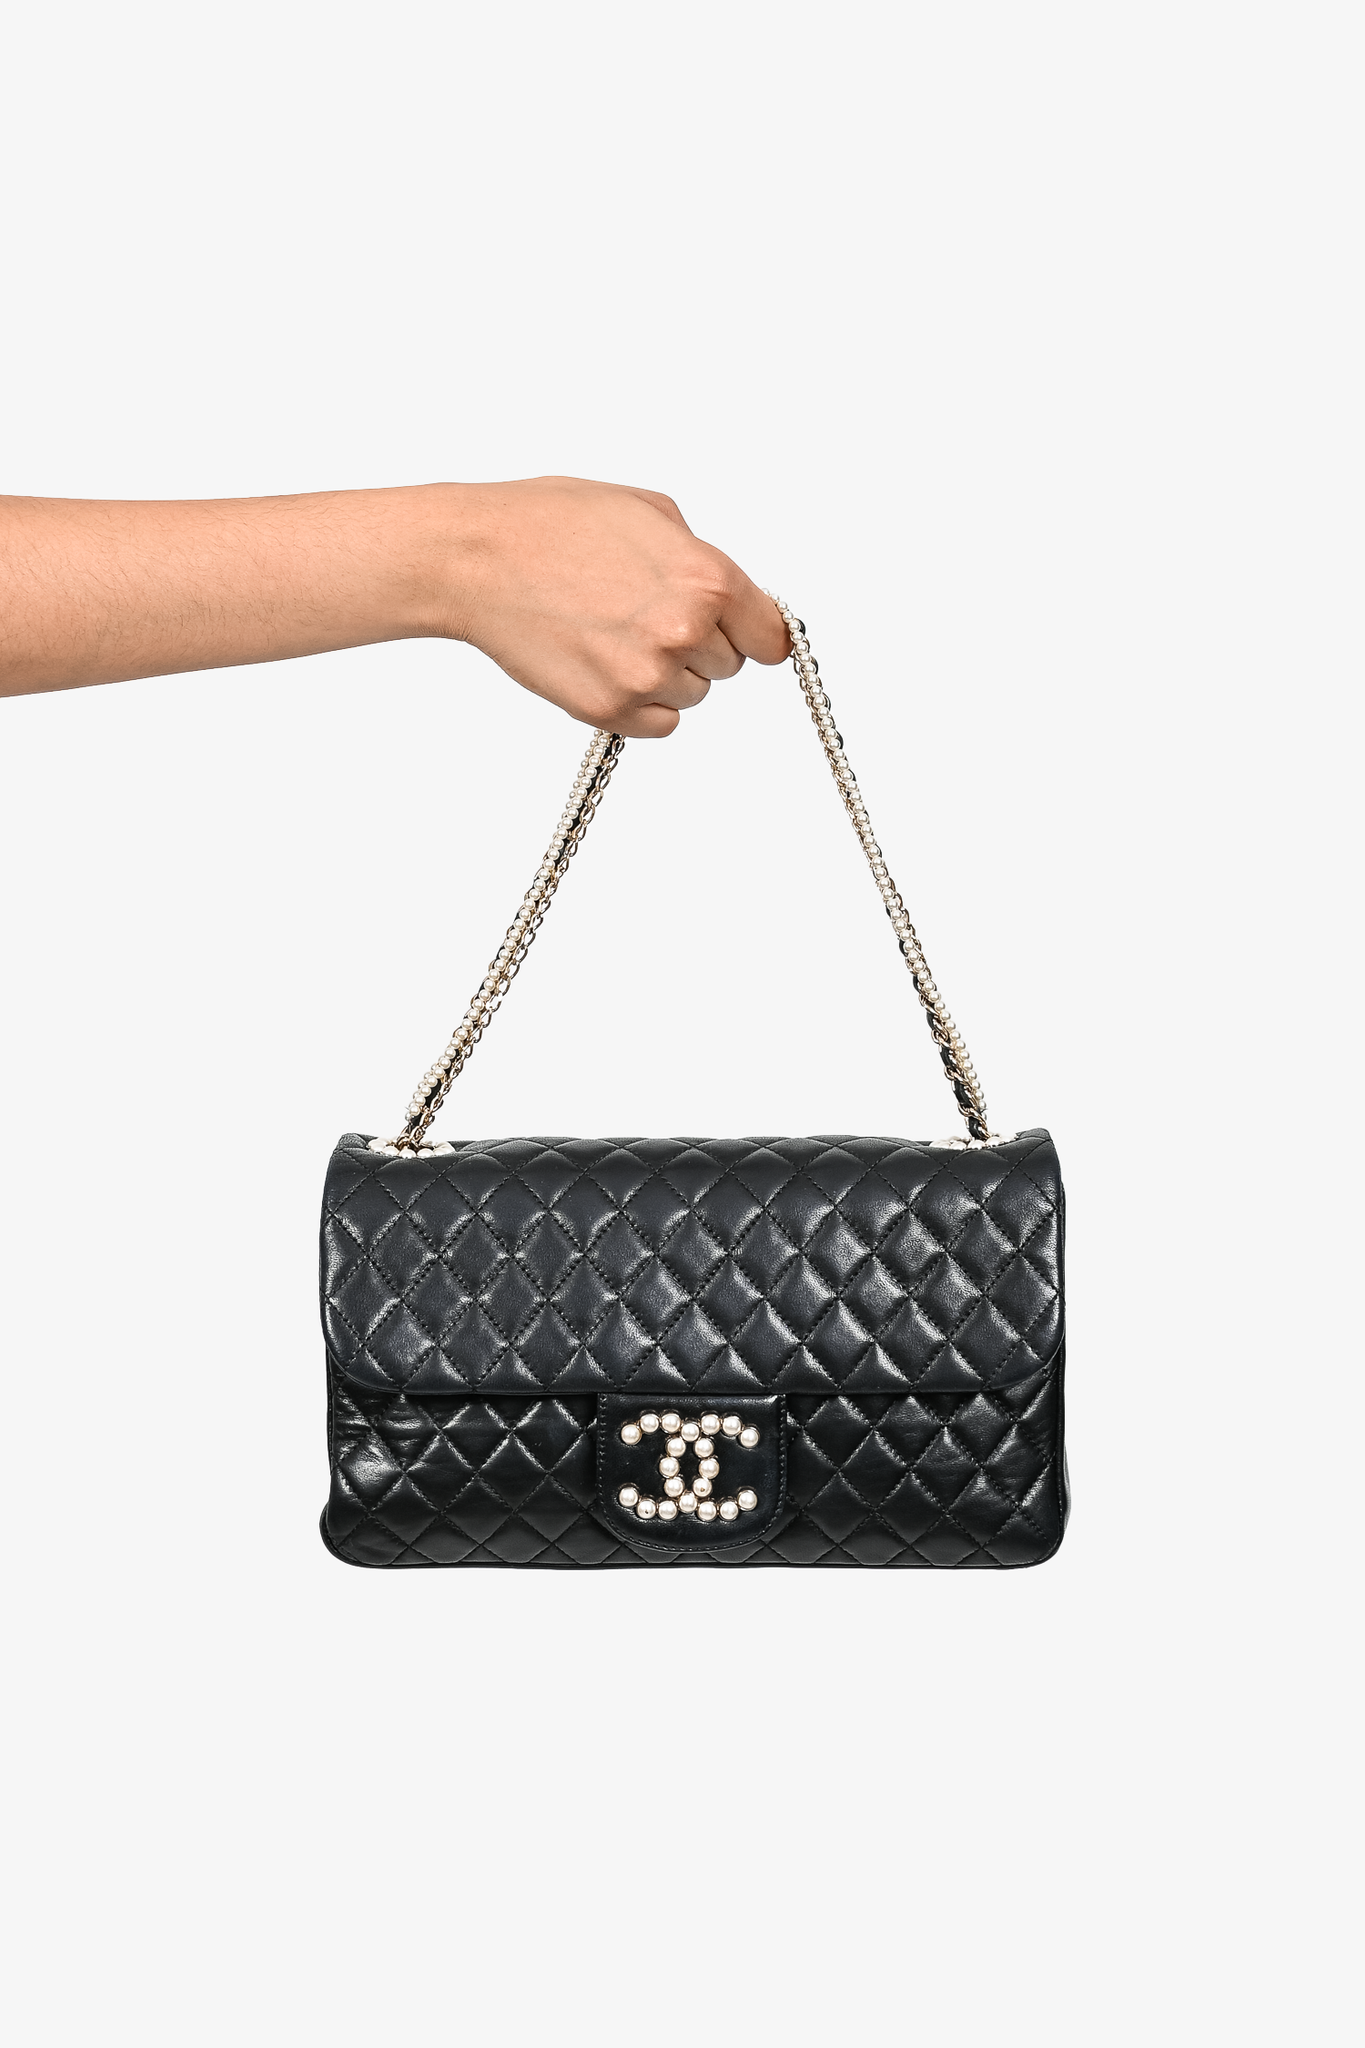 2012 Chanel Red, Black and White Quilted Lambskin Classic Single